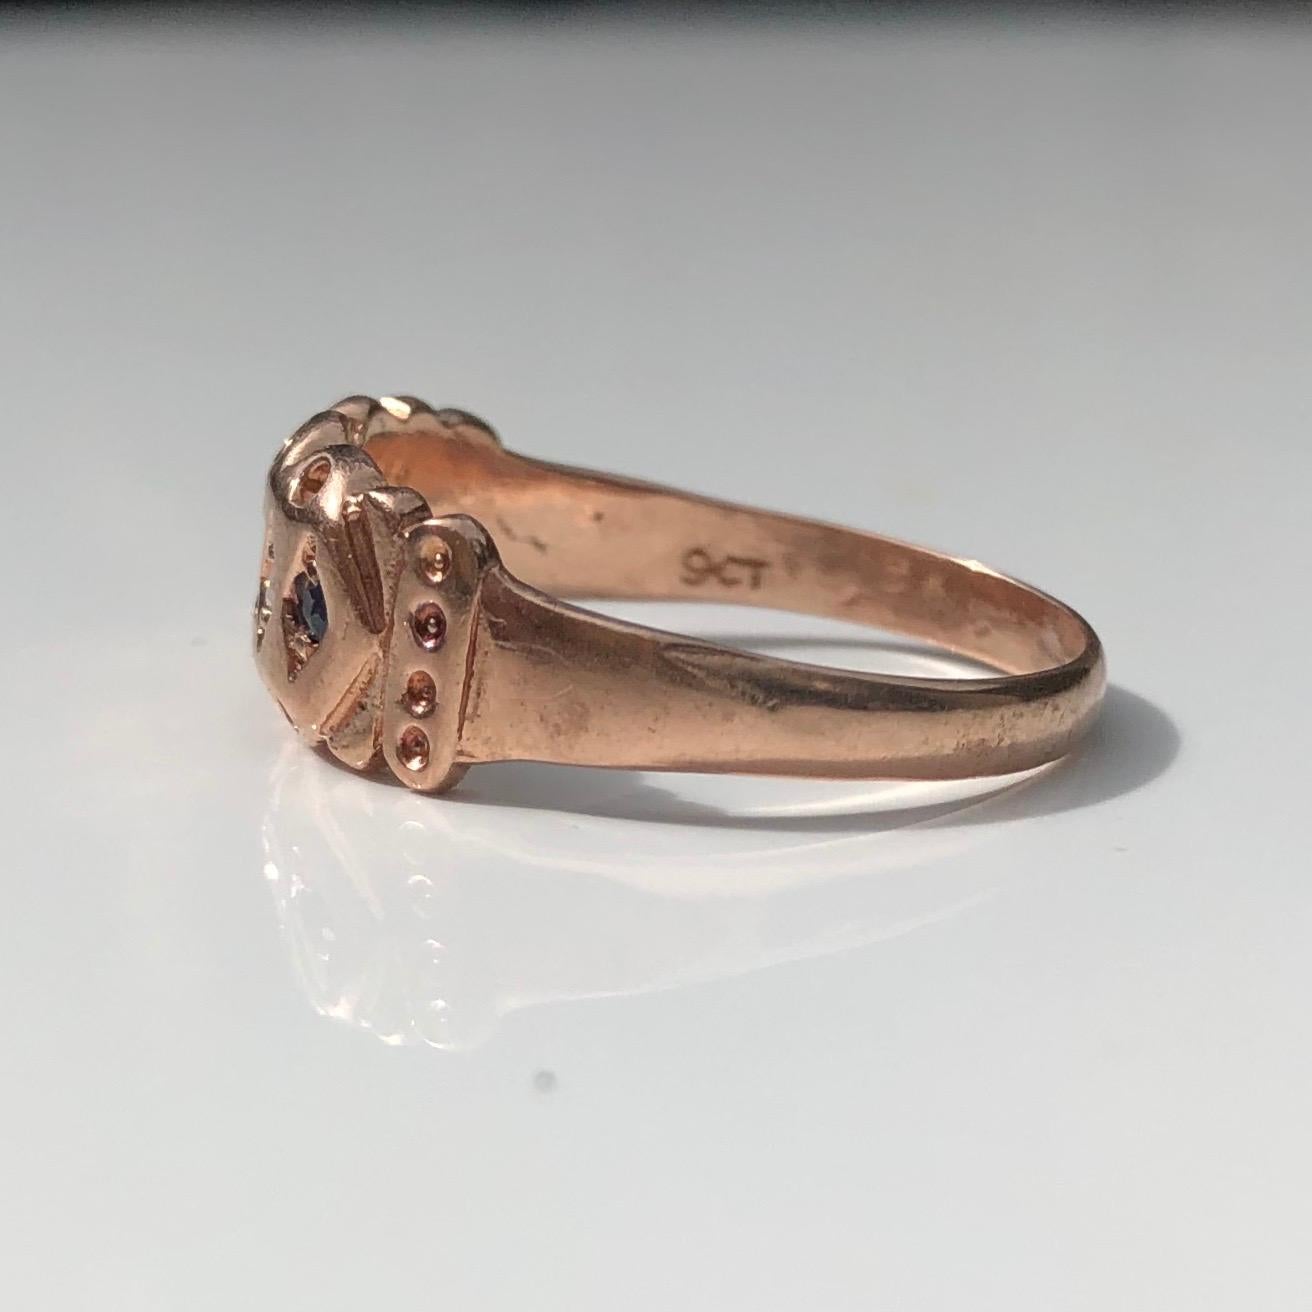 The gorgeous design of this ring includes scalloped and dot detail and is set with three sapphire points and two diamond points. The stones are small but have such a pretty sparkle and look gorgeous next to the rose gold. 

Ring Size: Q or 8
Band